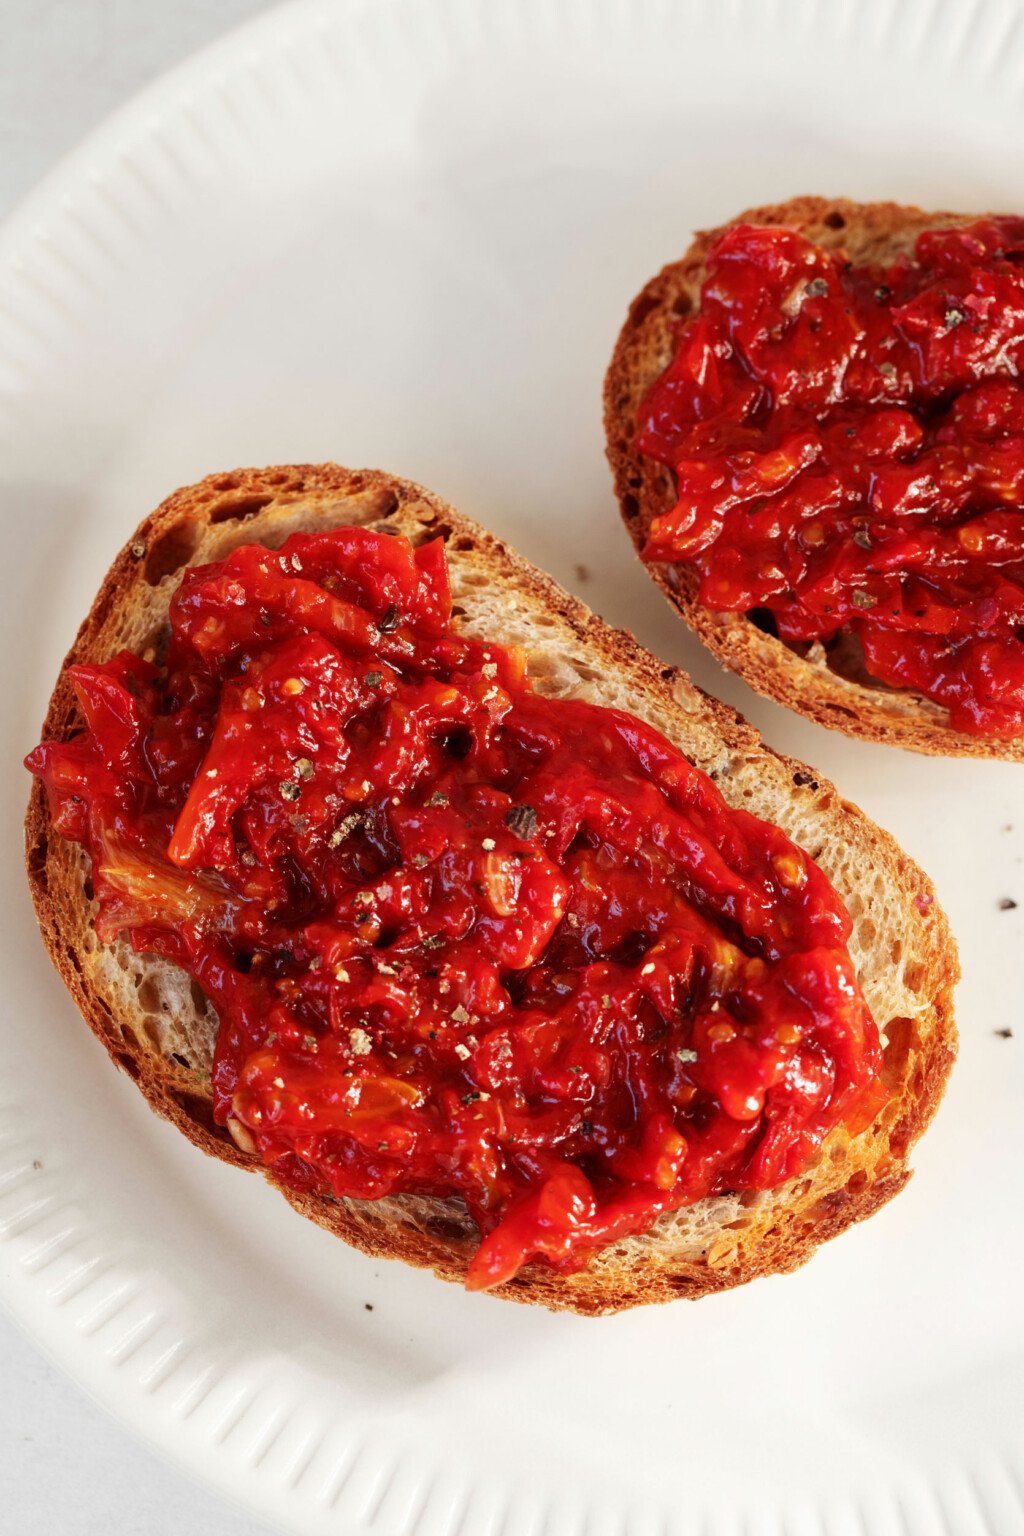 An overhead image of two slices of toast that have been topped with bright red, cherry tomato jam.